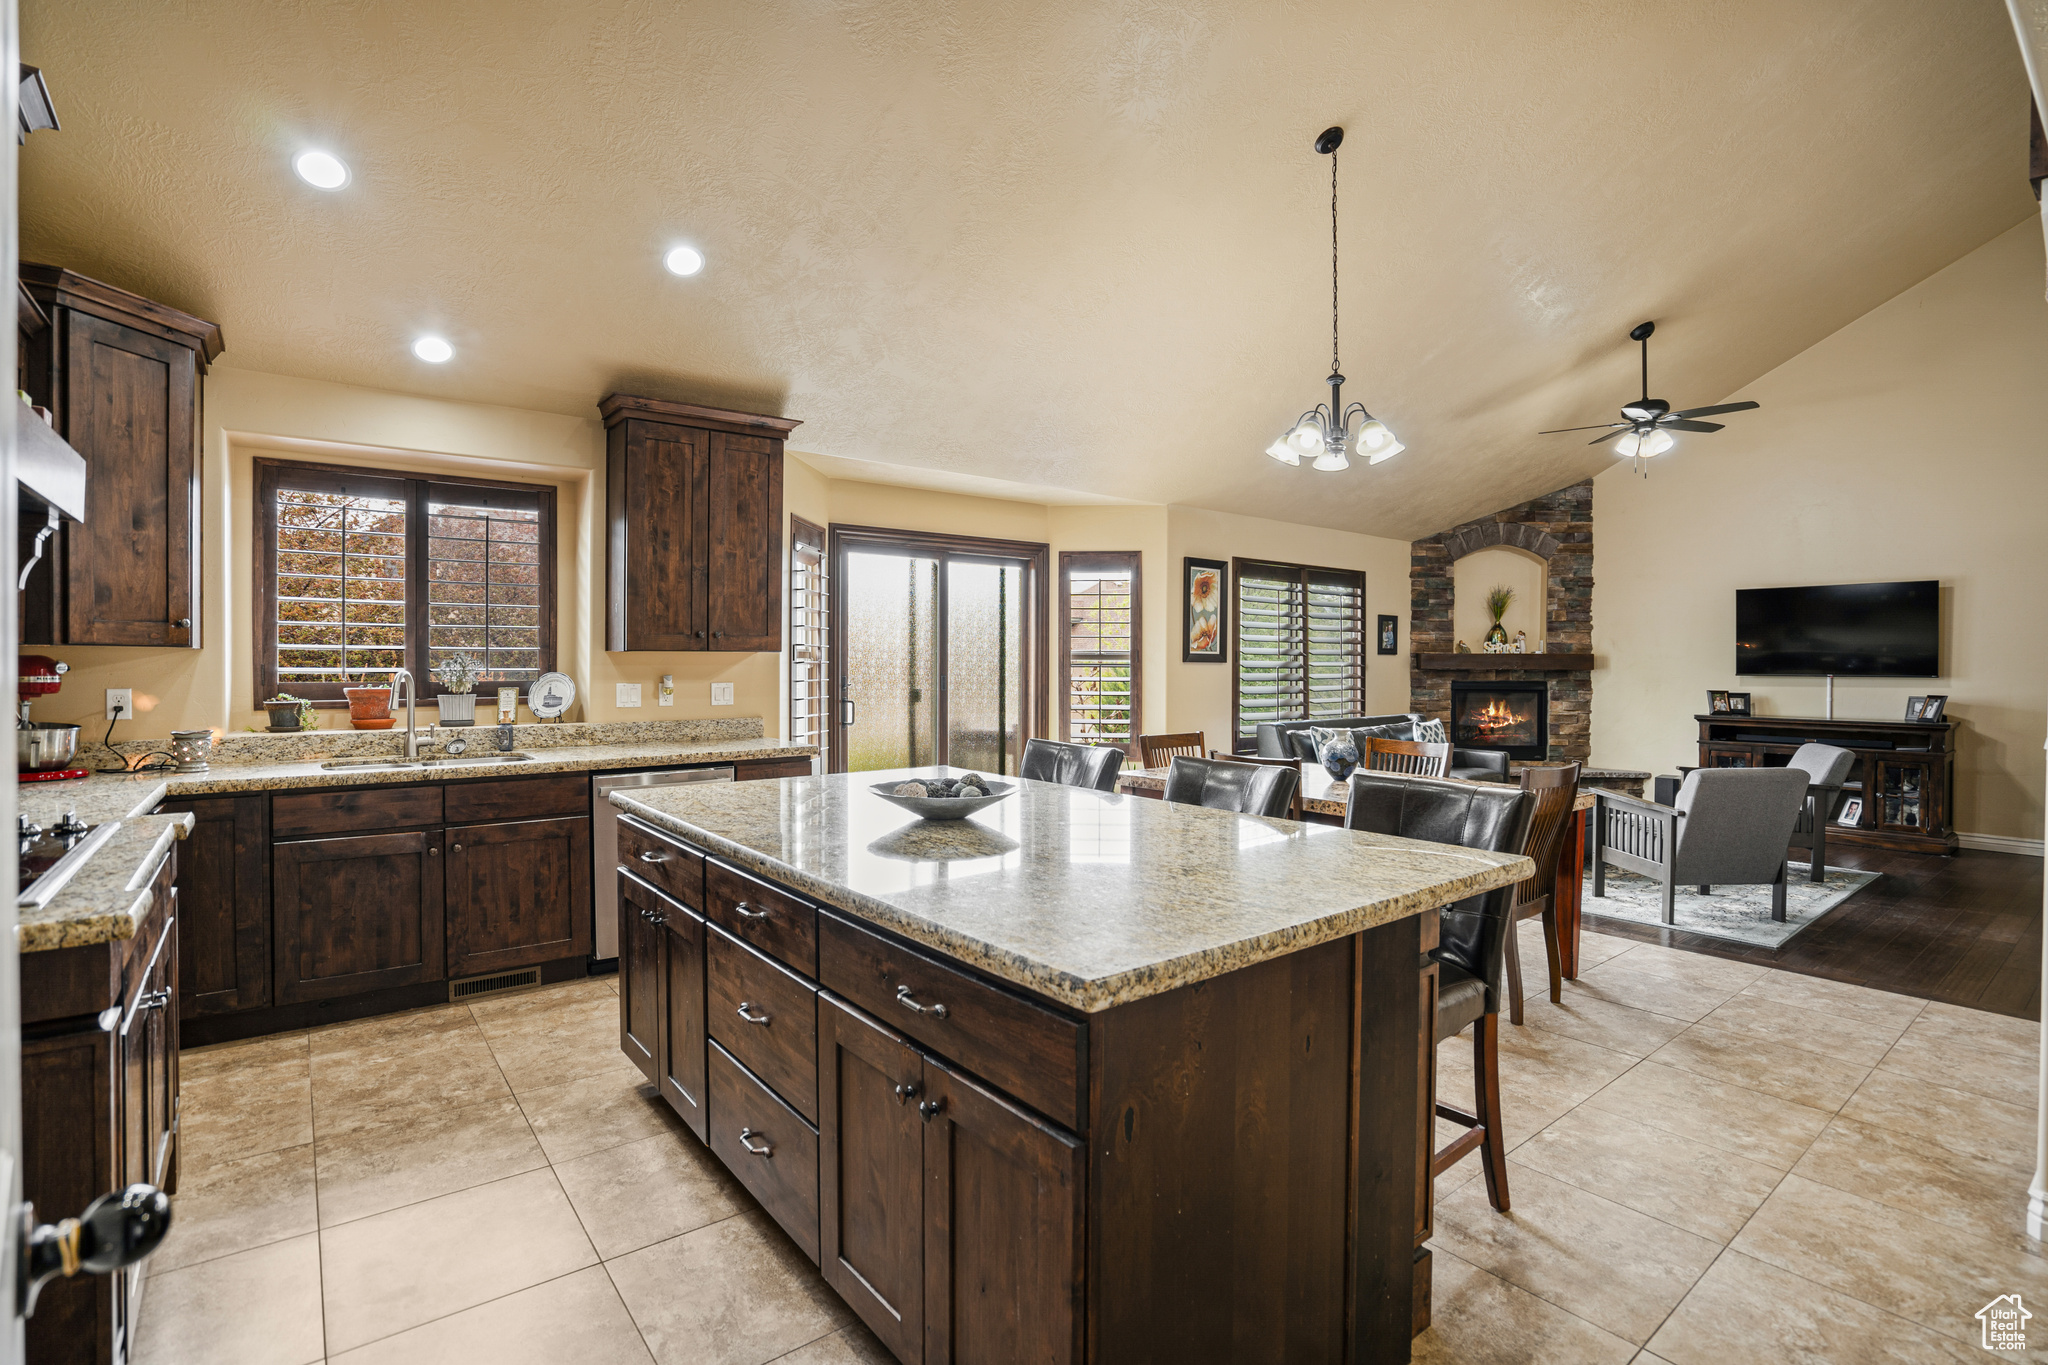 Kitchen featuring light stone counters, a center island, light tile floors, a fireplace, and ceiling fan with notable chandelier